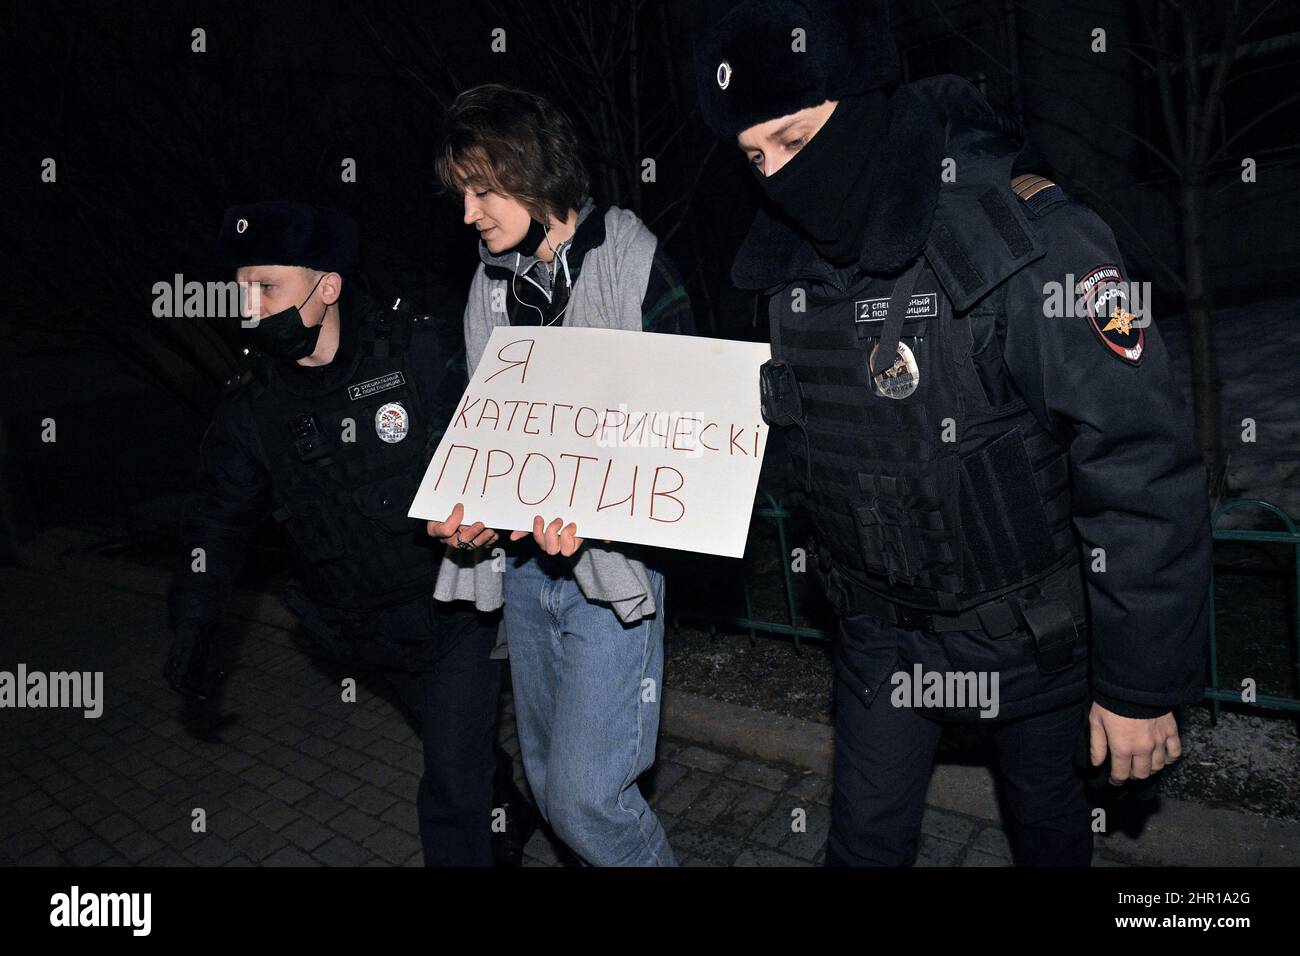 Moscow, Russia. 24th Feb, 2022. The situation at the Ukrainian Embassy in Russia in Leontievsky Lane. Single anti-war picket near the embassy building. Police officers during the detention of picketers. 24.02.2022 Russia, Moscow Photo credit: Gleb Schelkunov/Kommersant/Sipa USA Credit: Sipa US/Alamy Live News Stock Photo